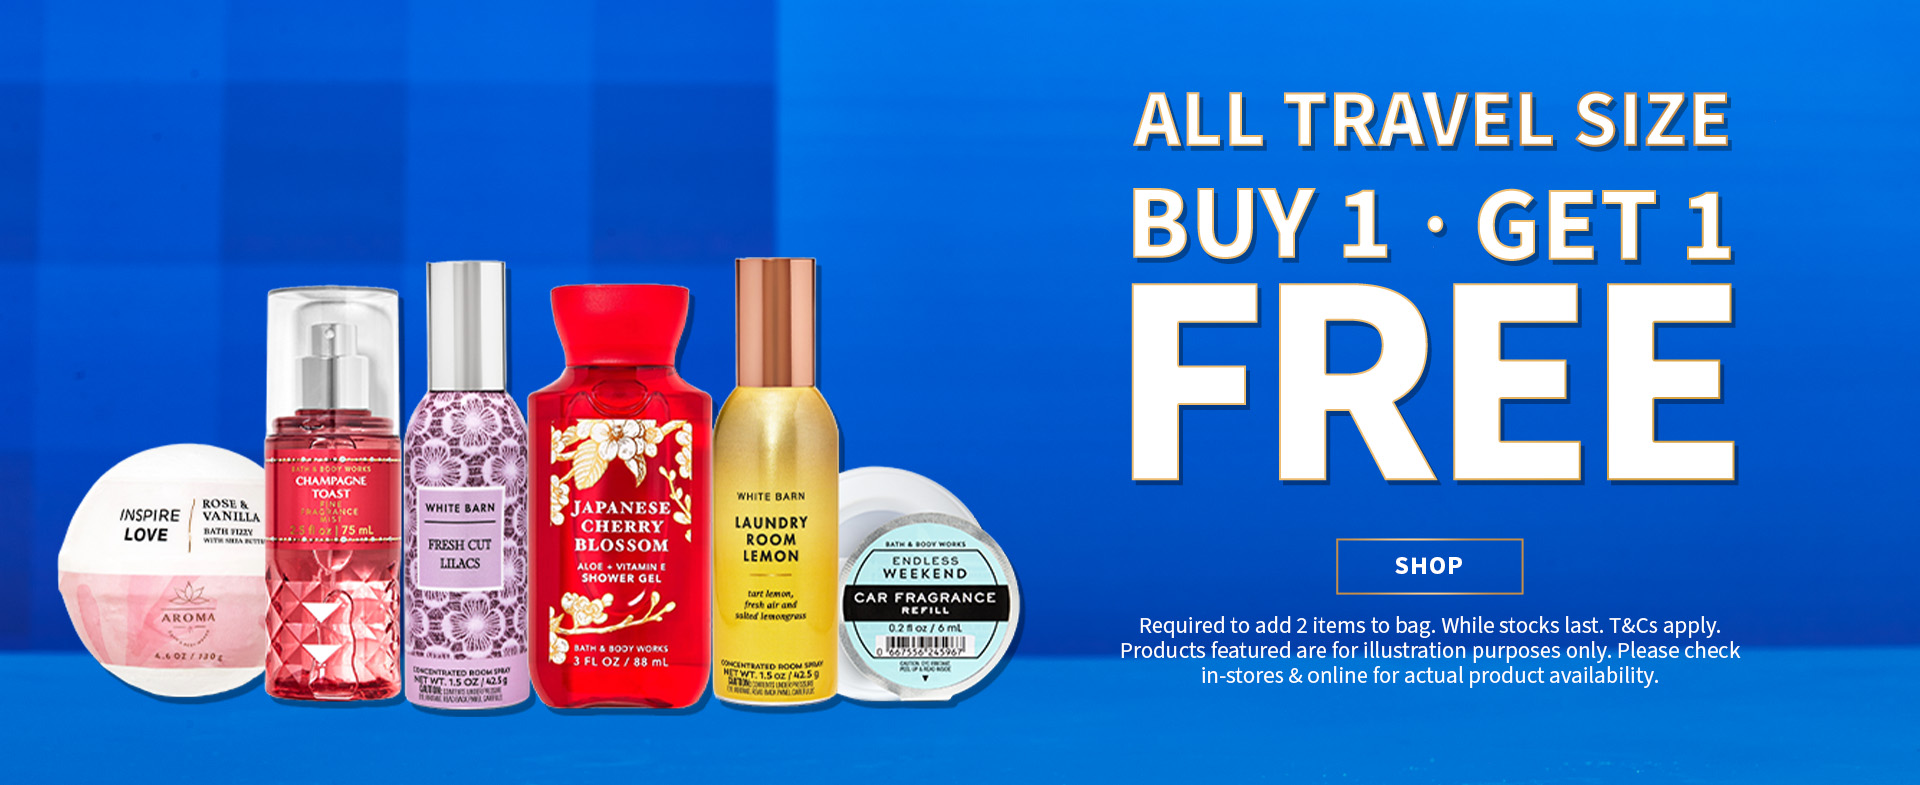 All Travel-Size Buy 1 Get 1 Free